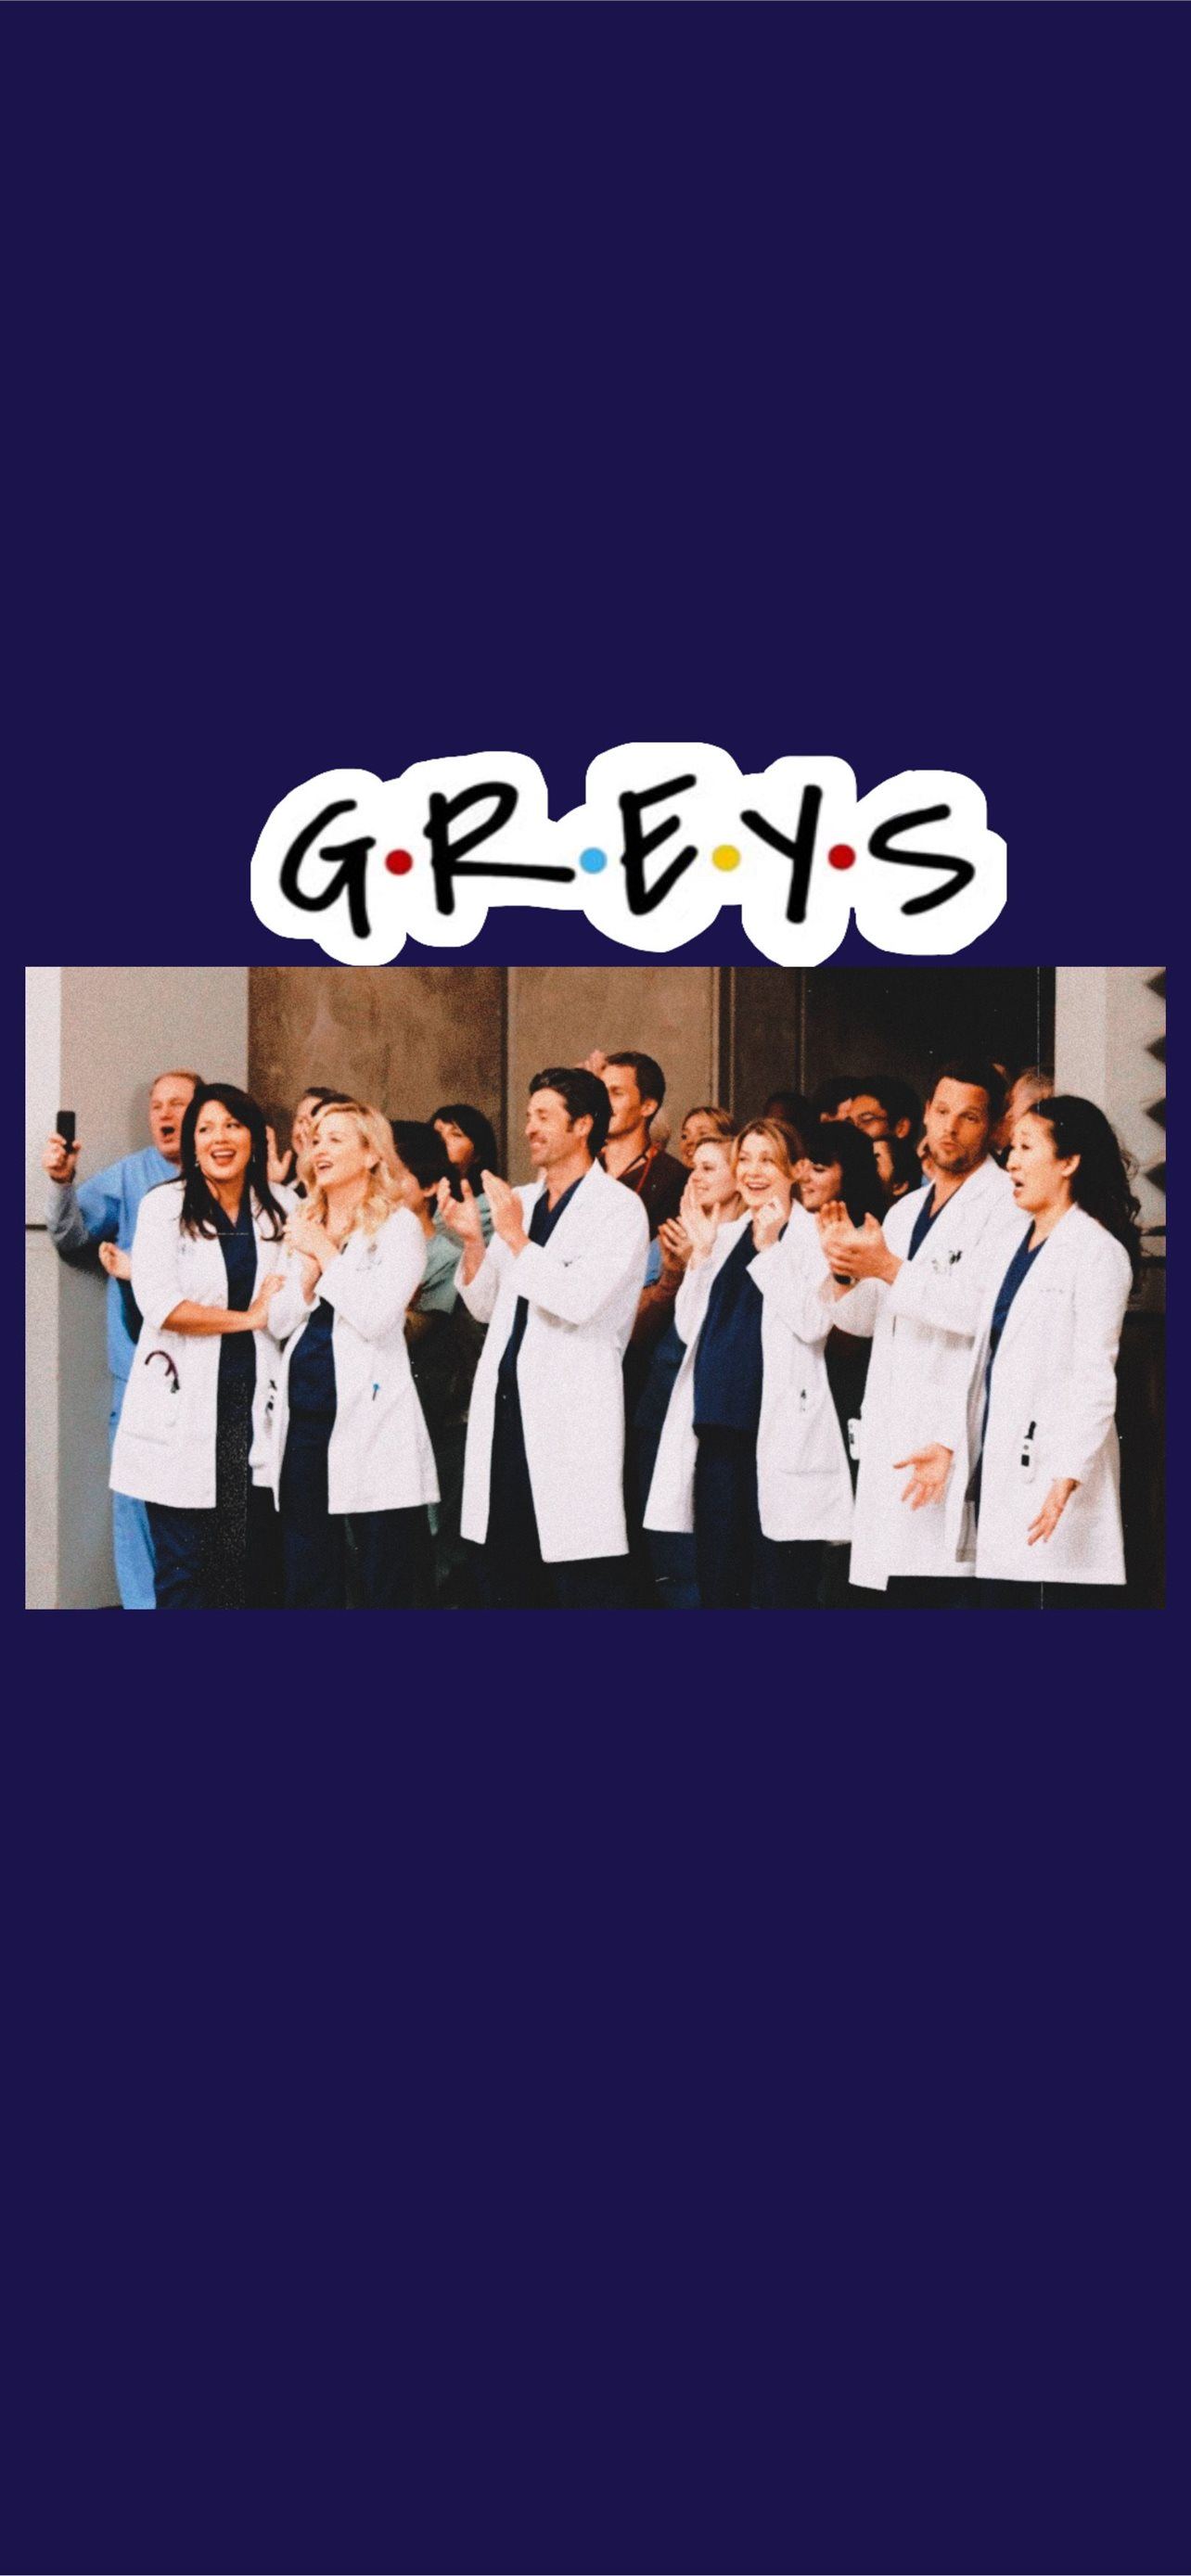 Greys Anatomy in 2021 iPhone Wallpapers Free Download